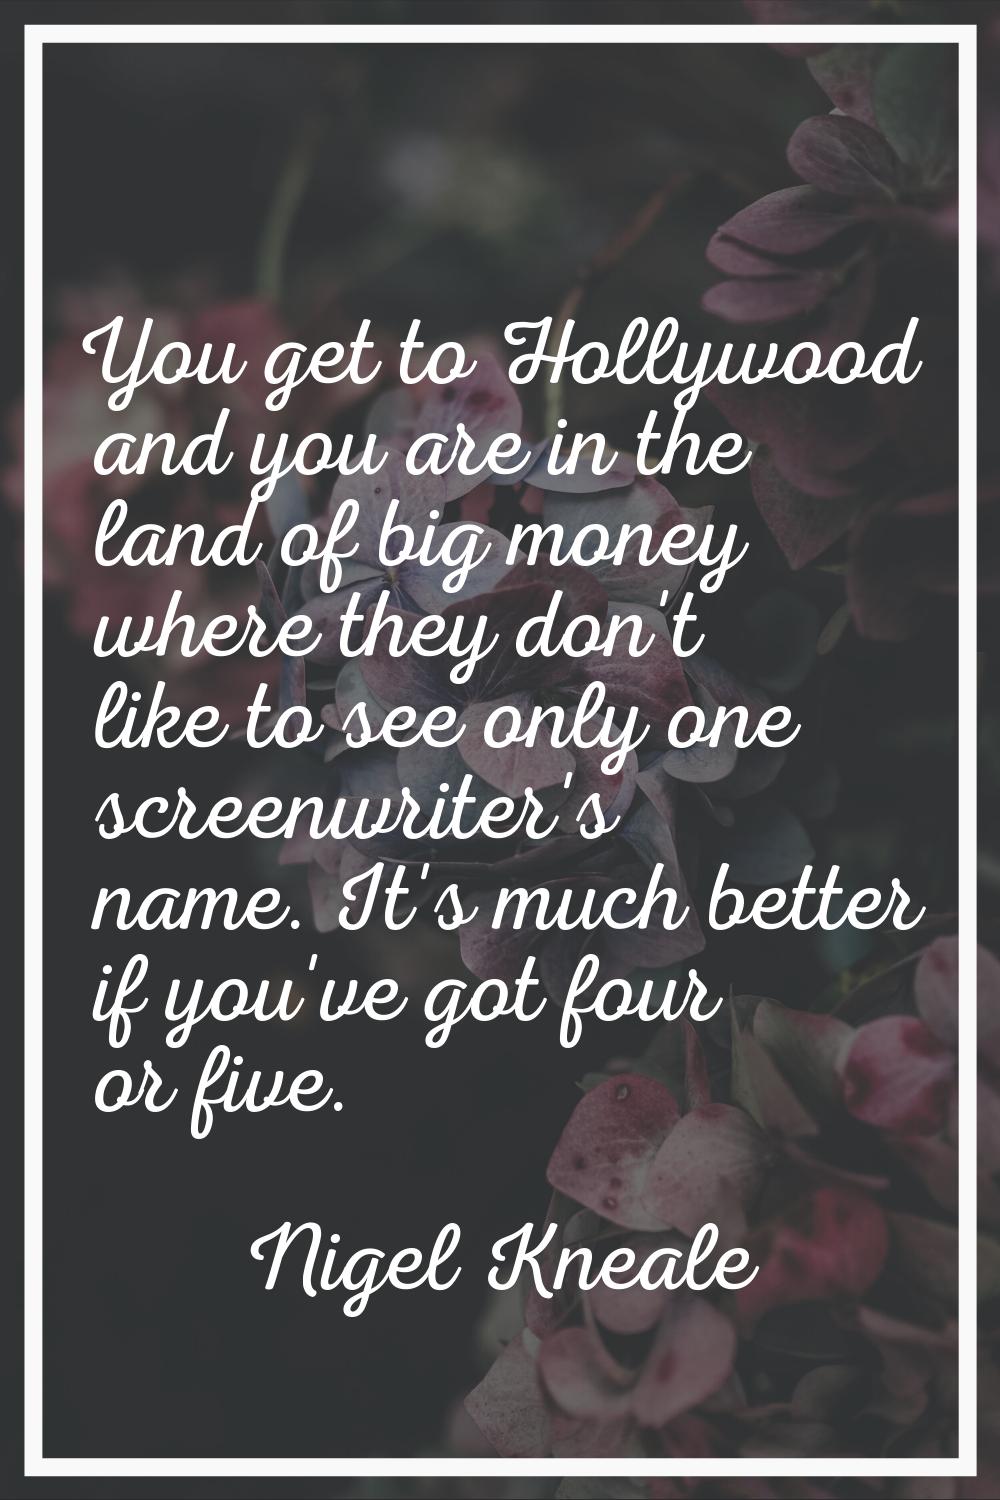 You get to Hollywood and you are in the land of big money where they don't like to see only one scr